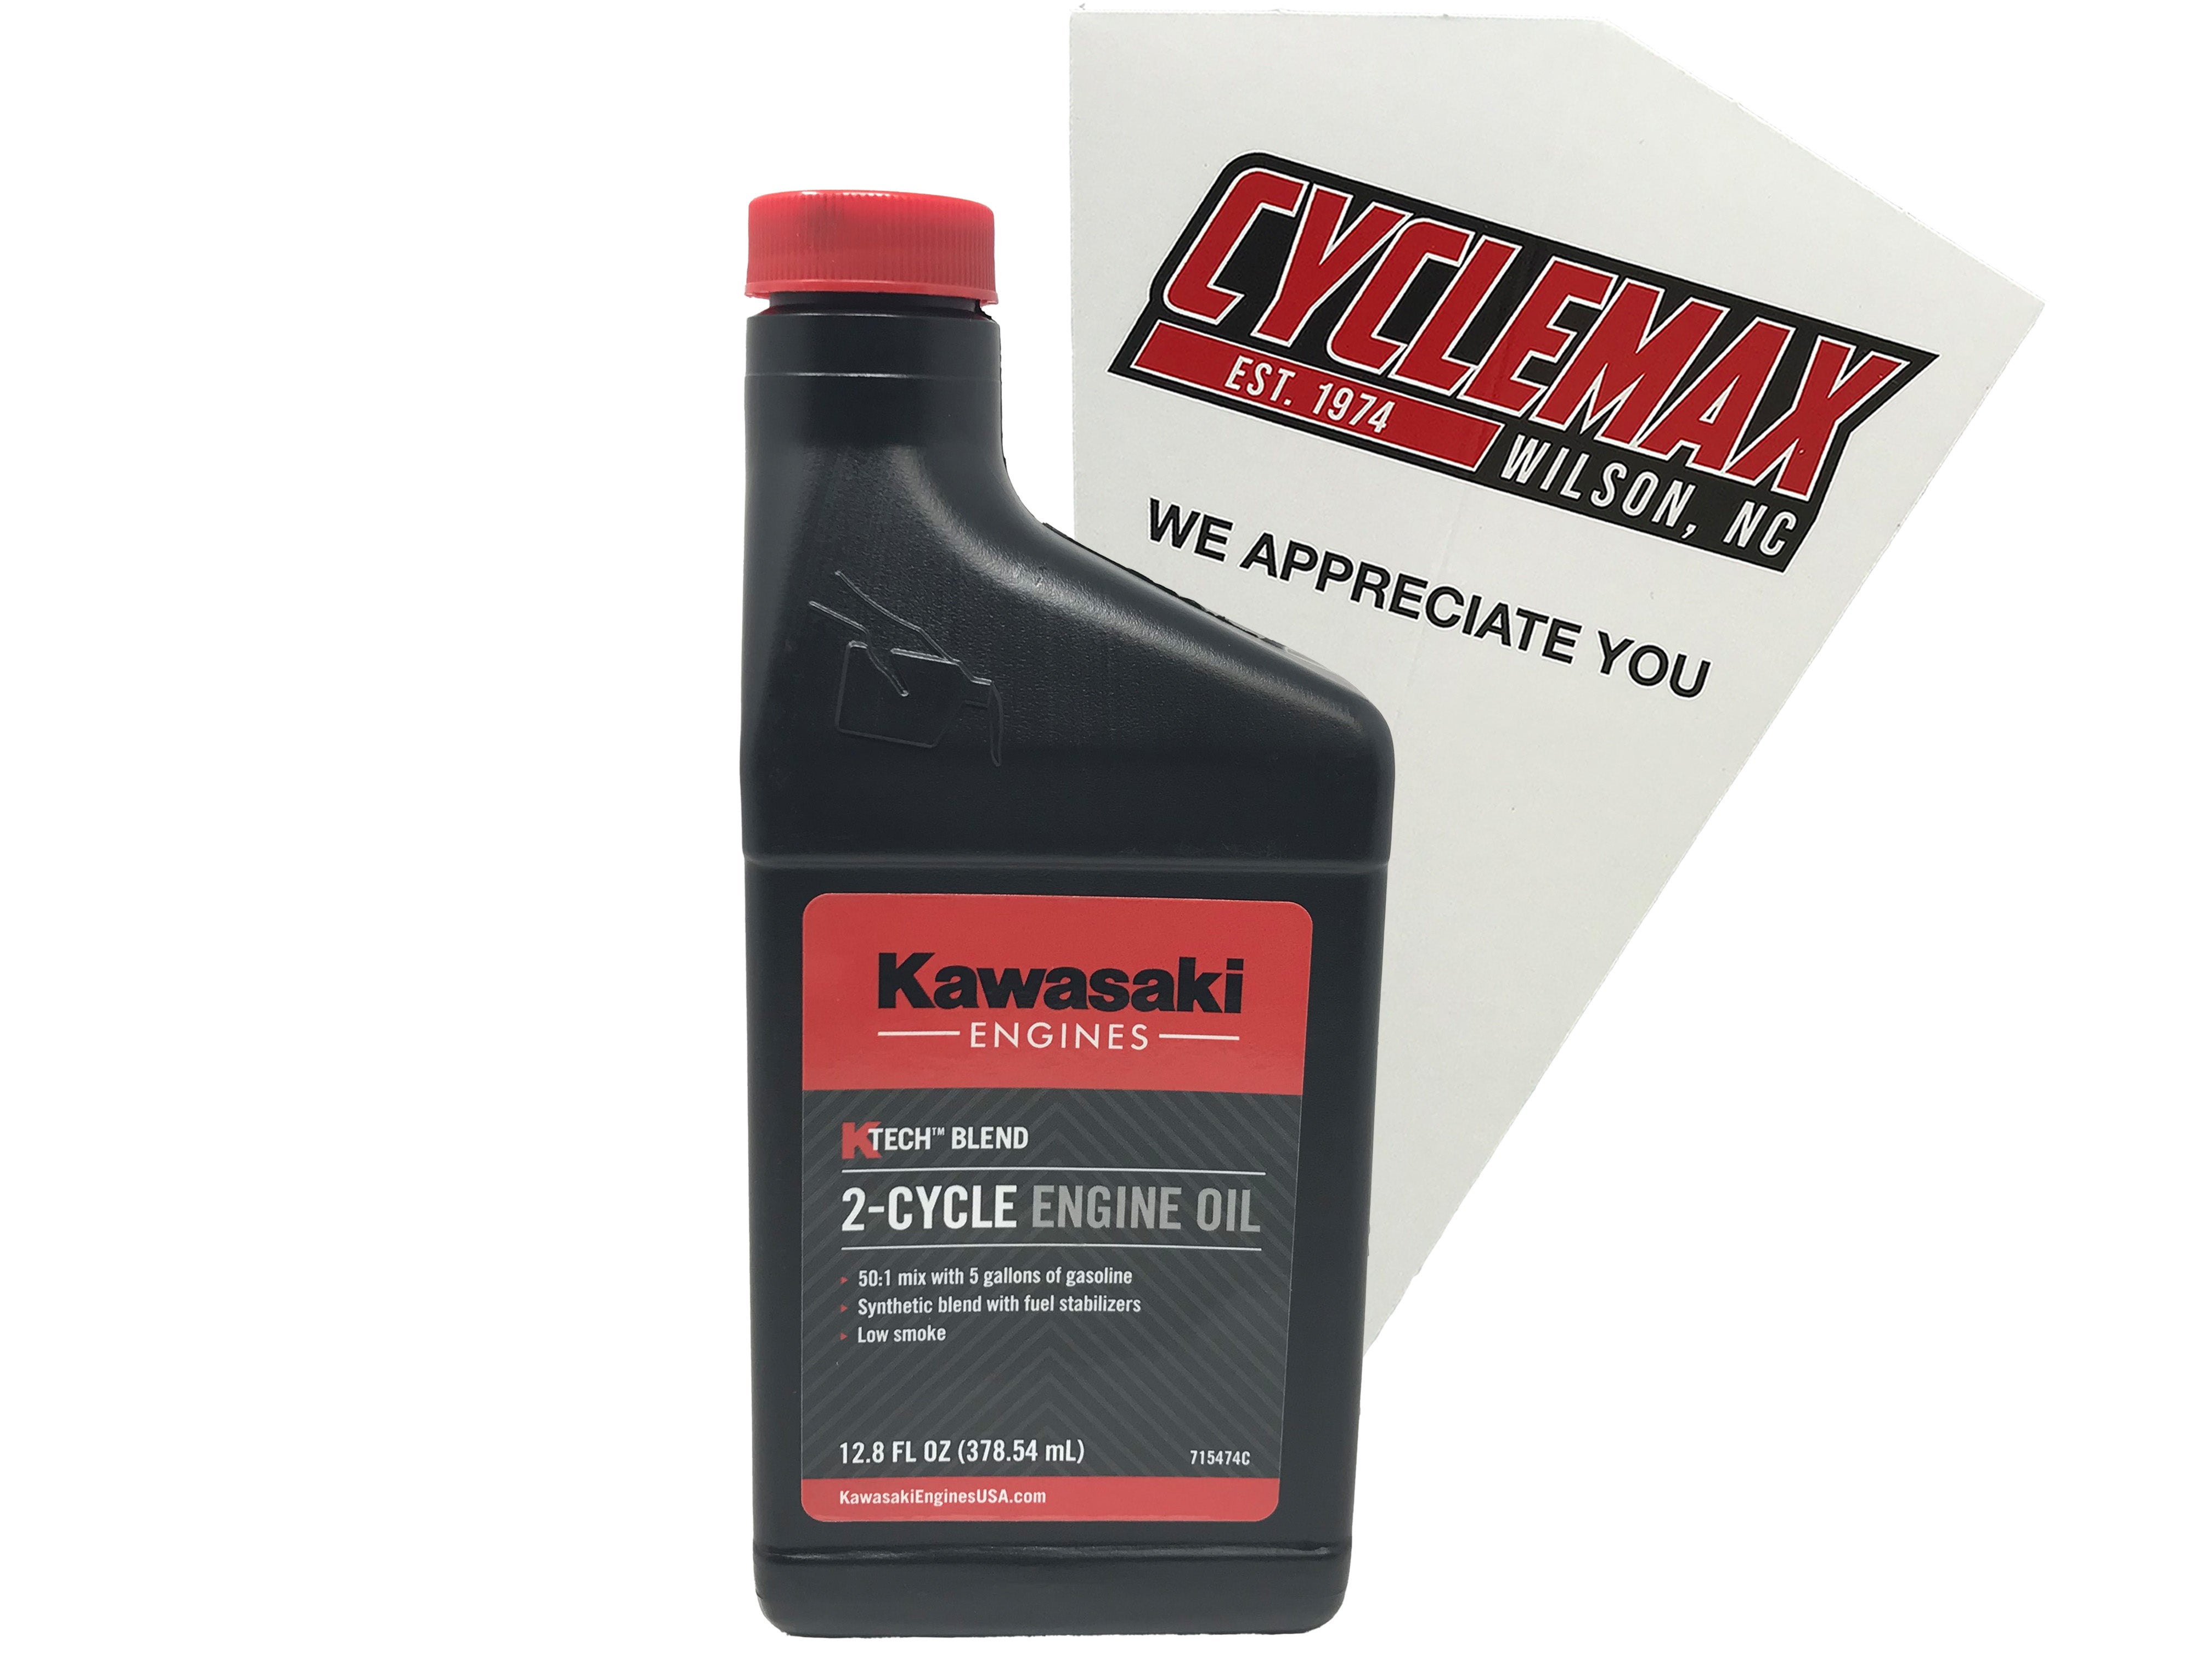 Cyclemax One Pack of Kawasaki KTech 2-Cycle Two Stroke Engine Oil 12.8oz 99969-6085 Contains One Bottle and a Funnel